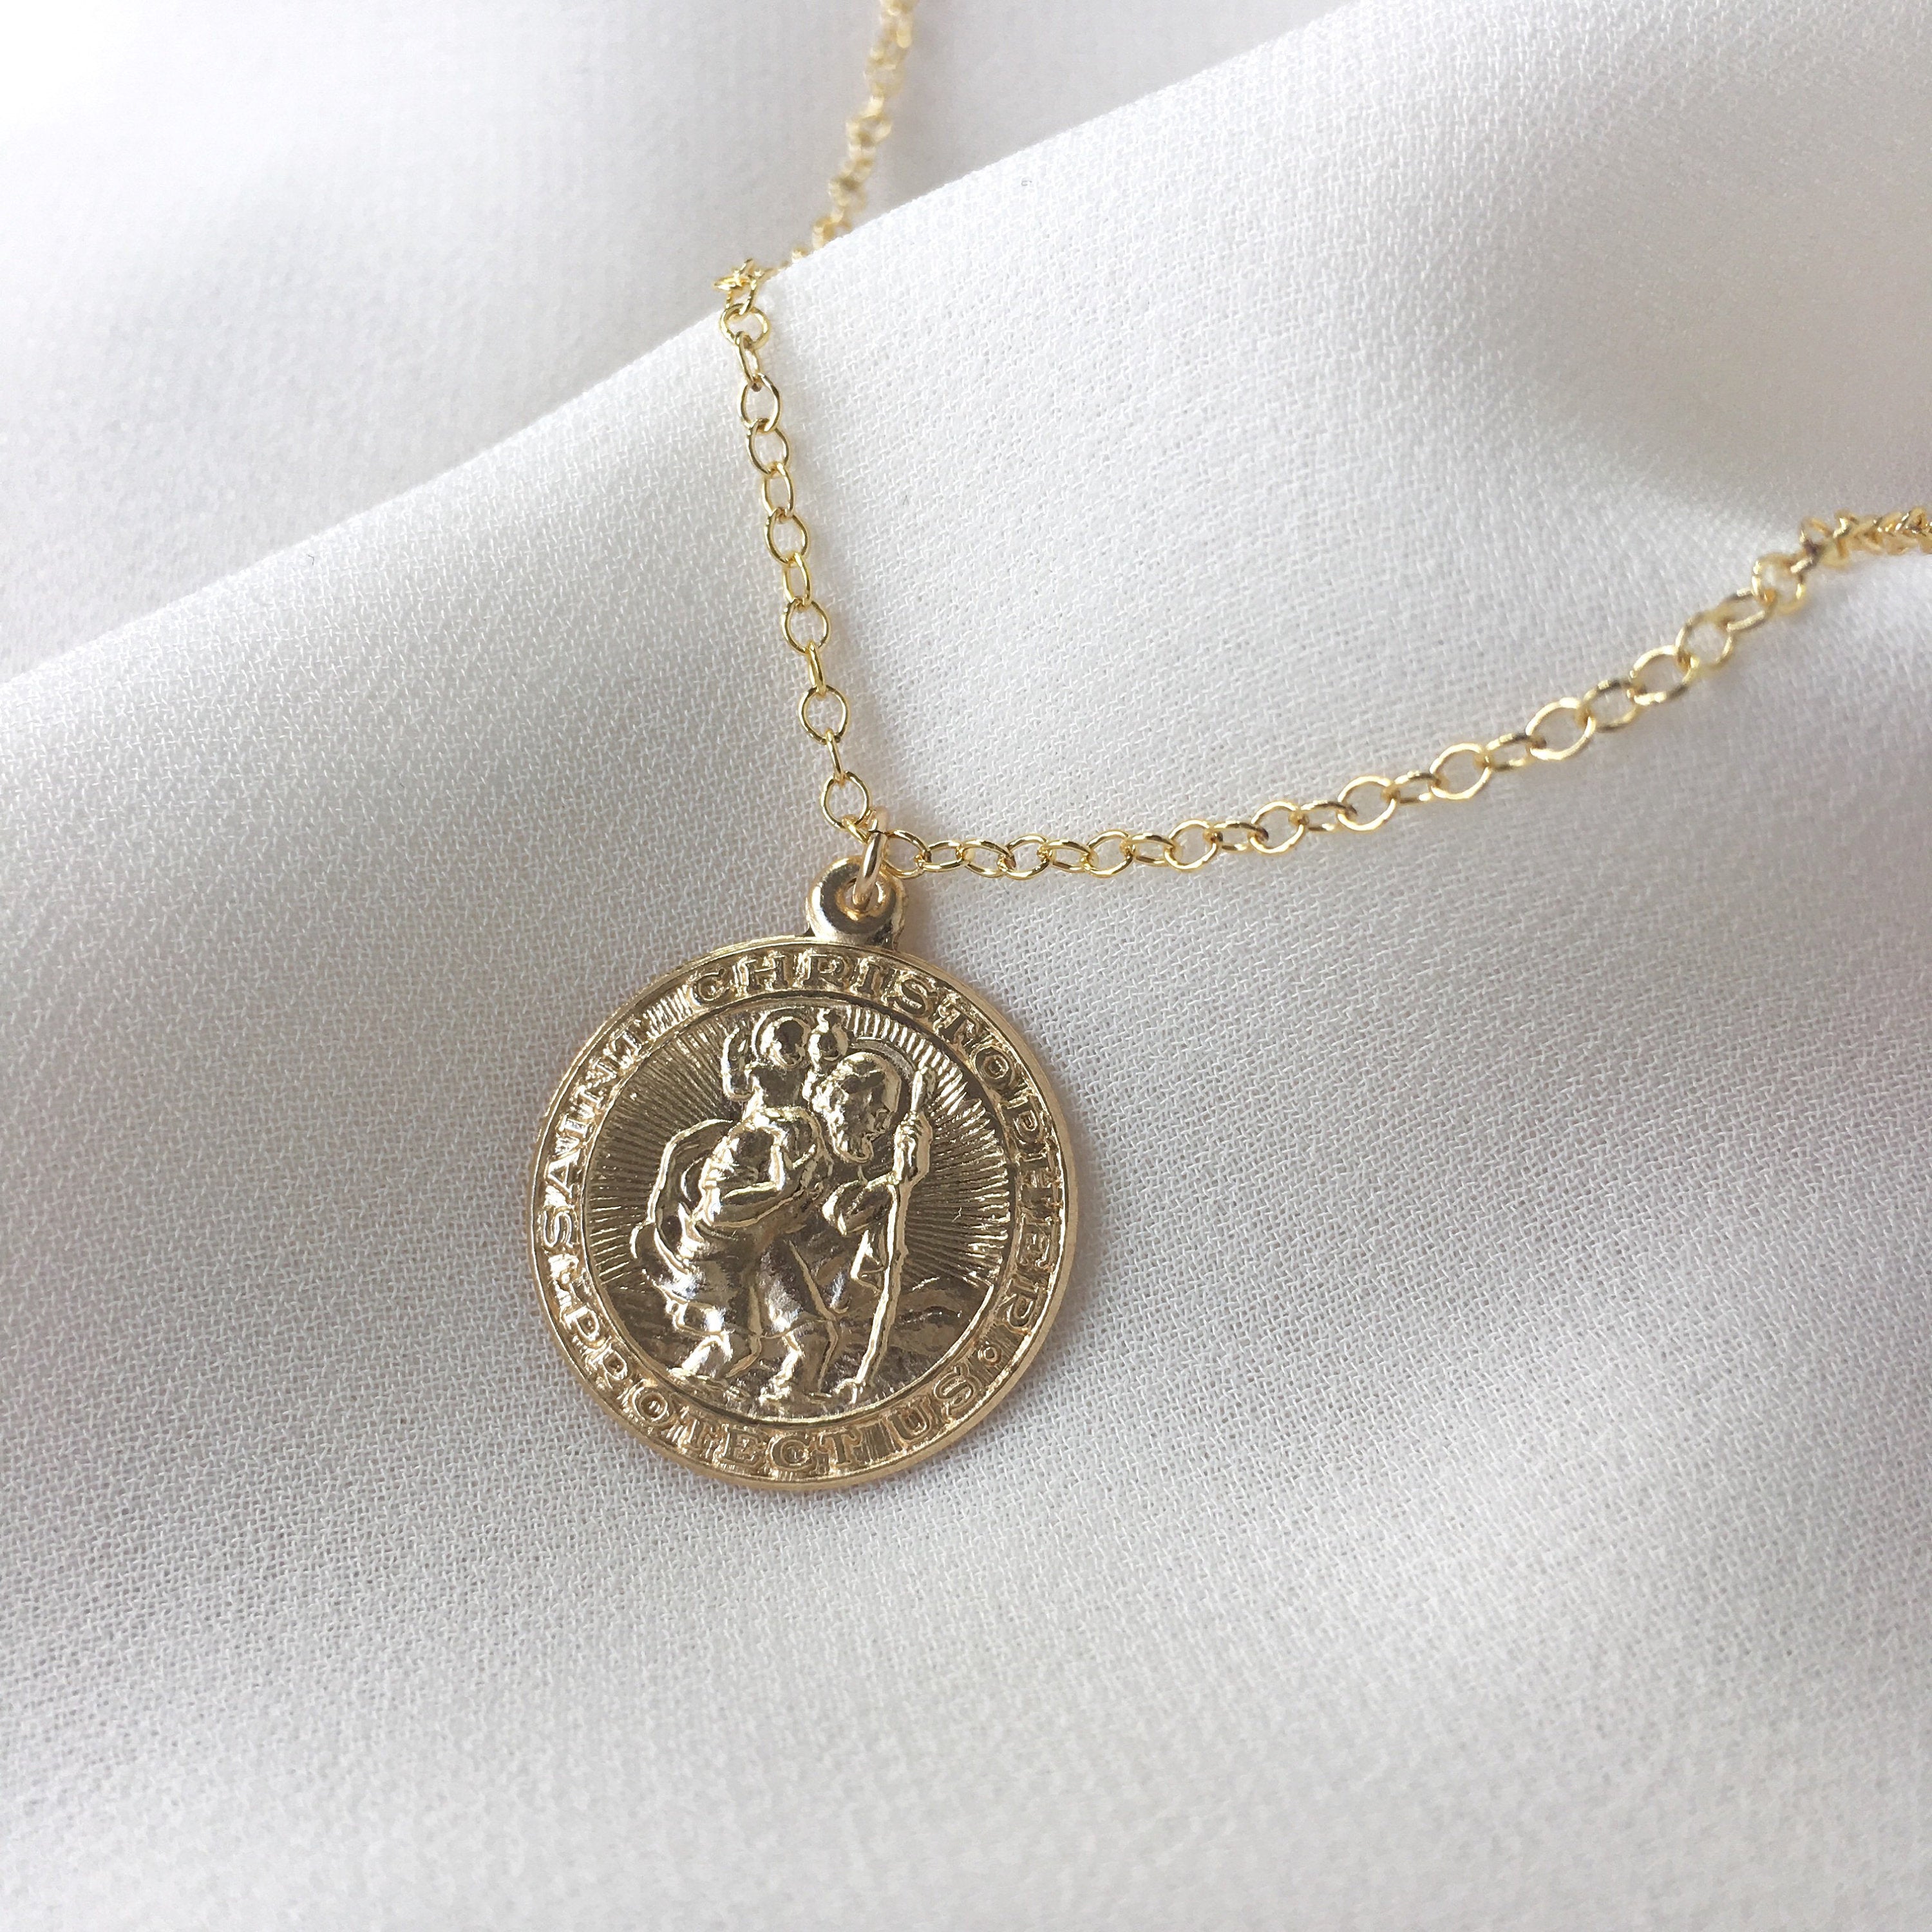 Coin Necklace - Gold Filled Coin Necklace, Gold Coin Pendant Necklace, St Christopher Pendant, St Christopher Necklace  |GFN00020